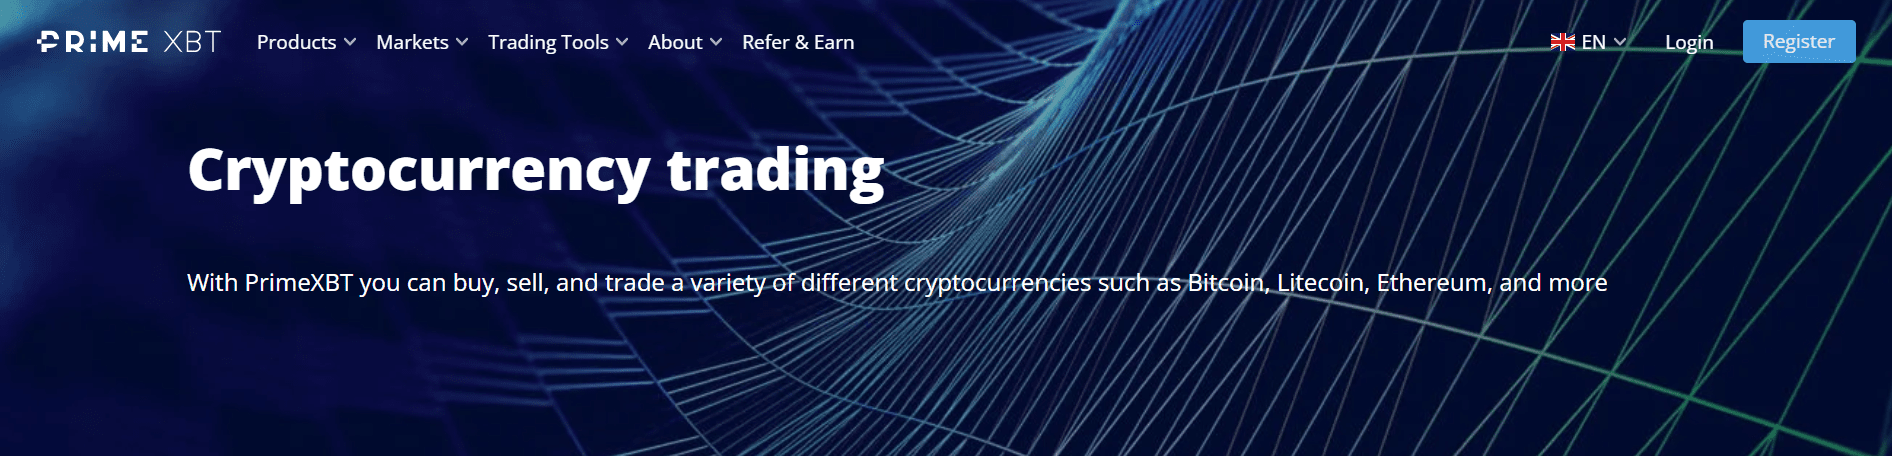 primexbt cryptocurrency trading